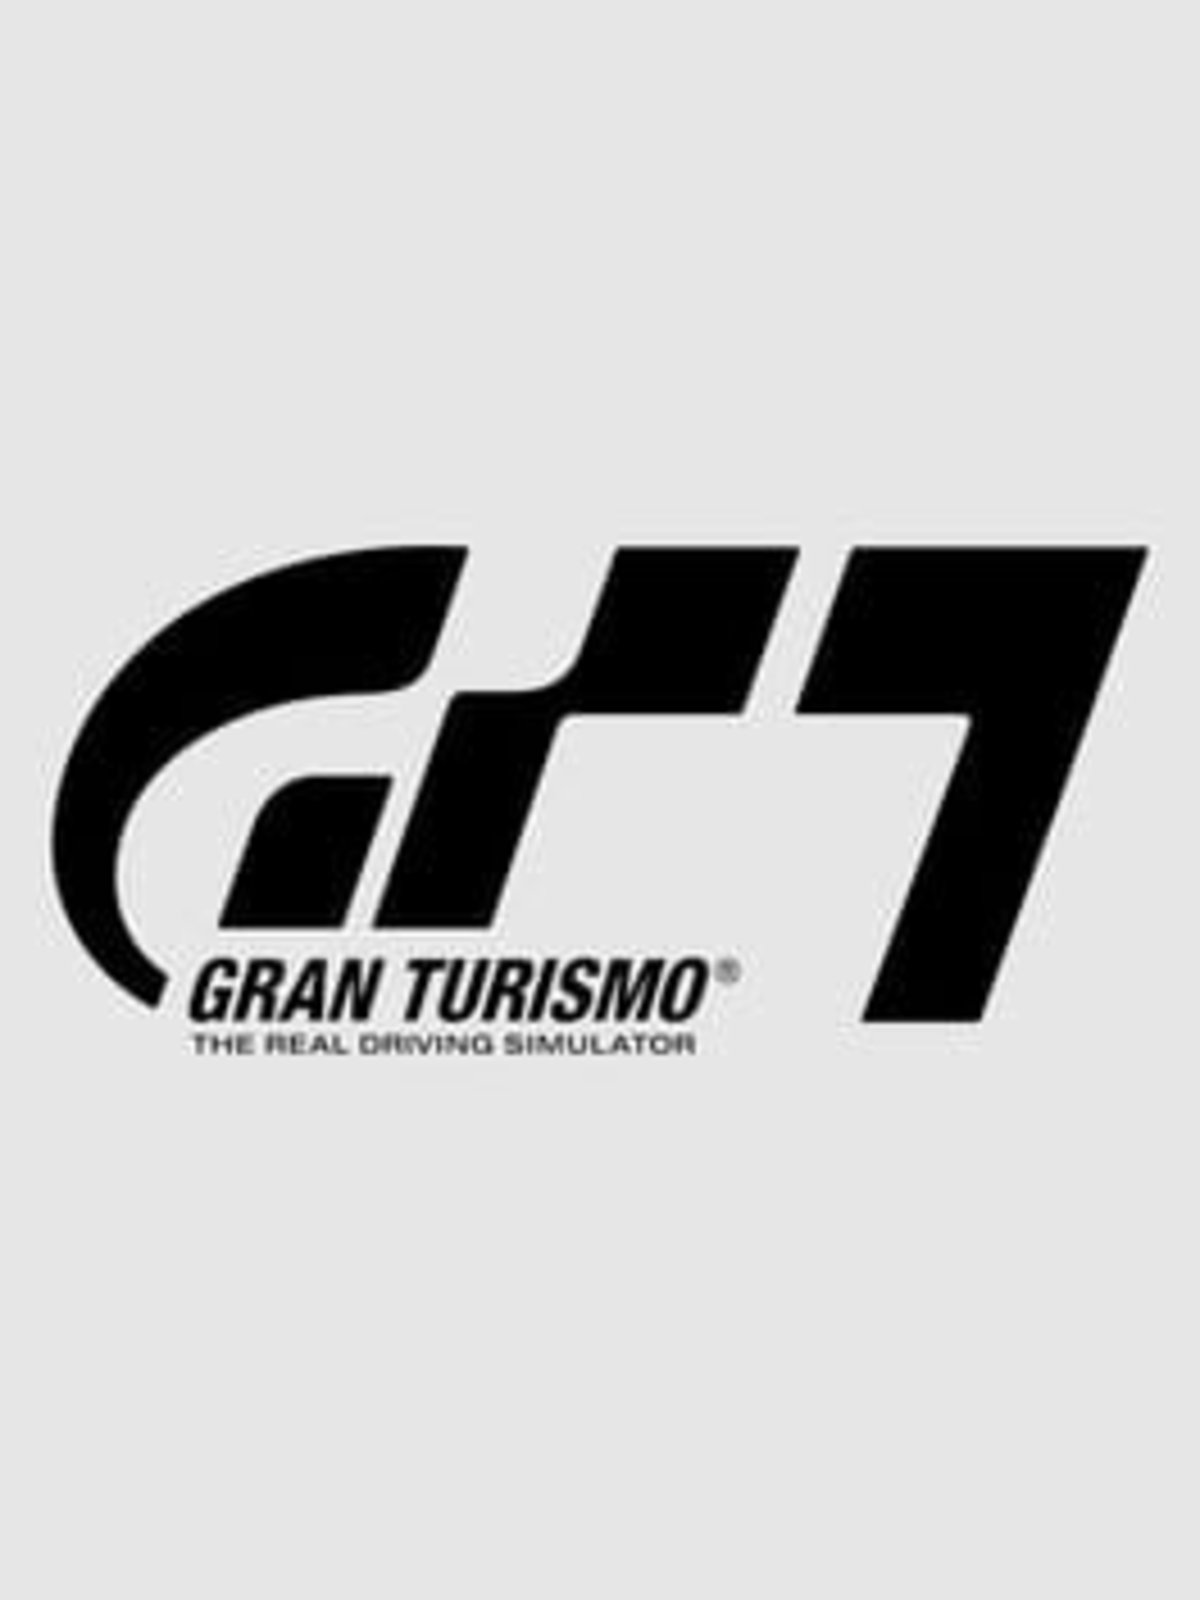 Gran Turismo 7 shown in a new gameplay trailer